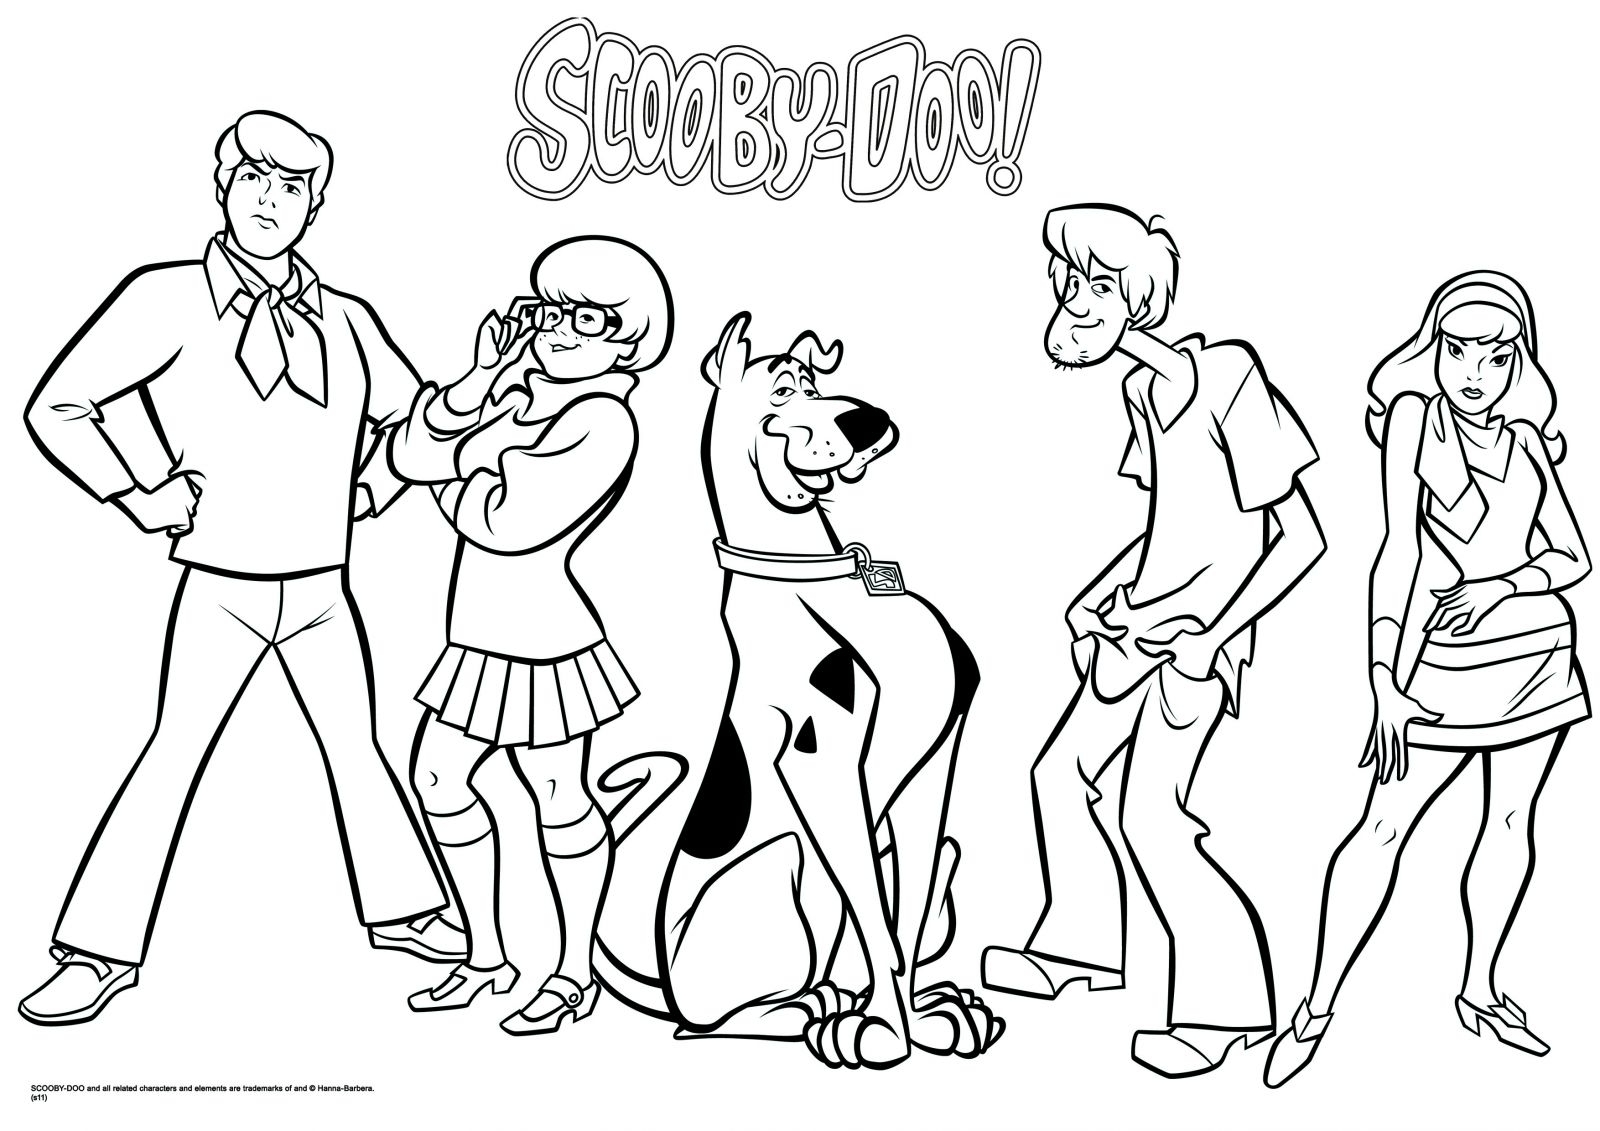 Scooby Doo Gang Coloring Pages at GetColorings.com | Free printable ...